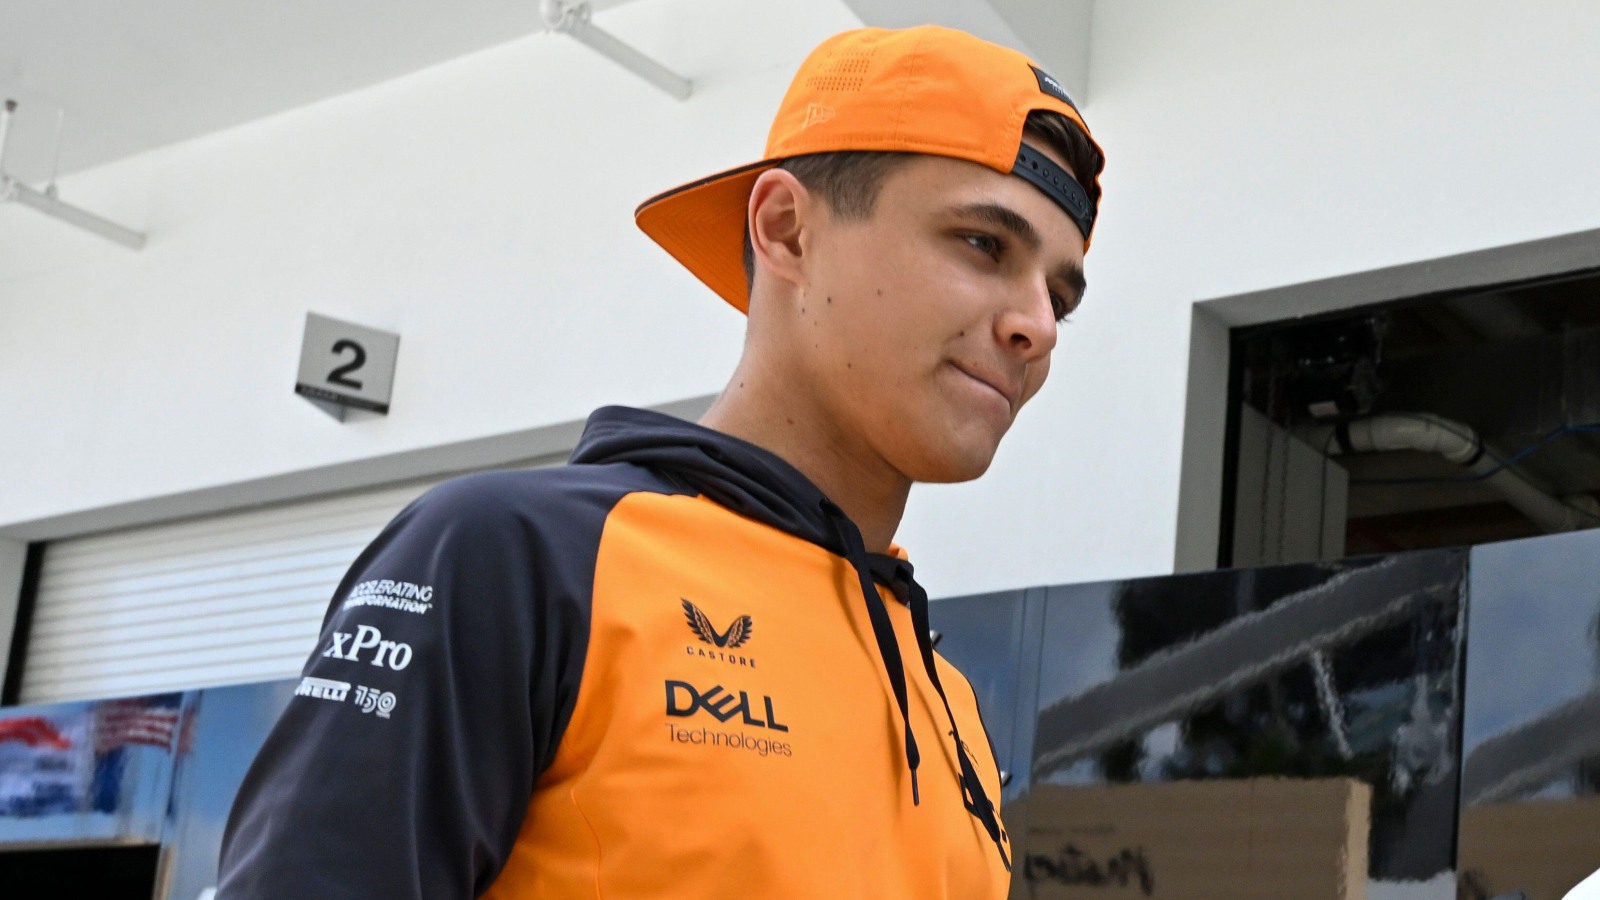 Lando Norris arrives at the paddock for the Miami Grand Prix. Miami, May 2022.